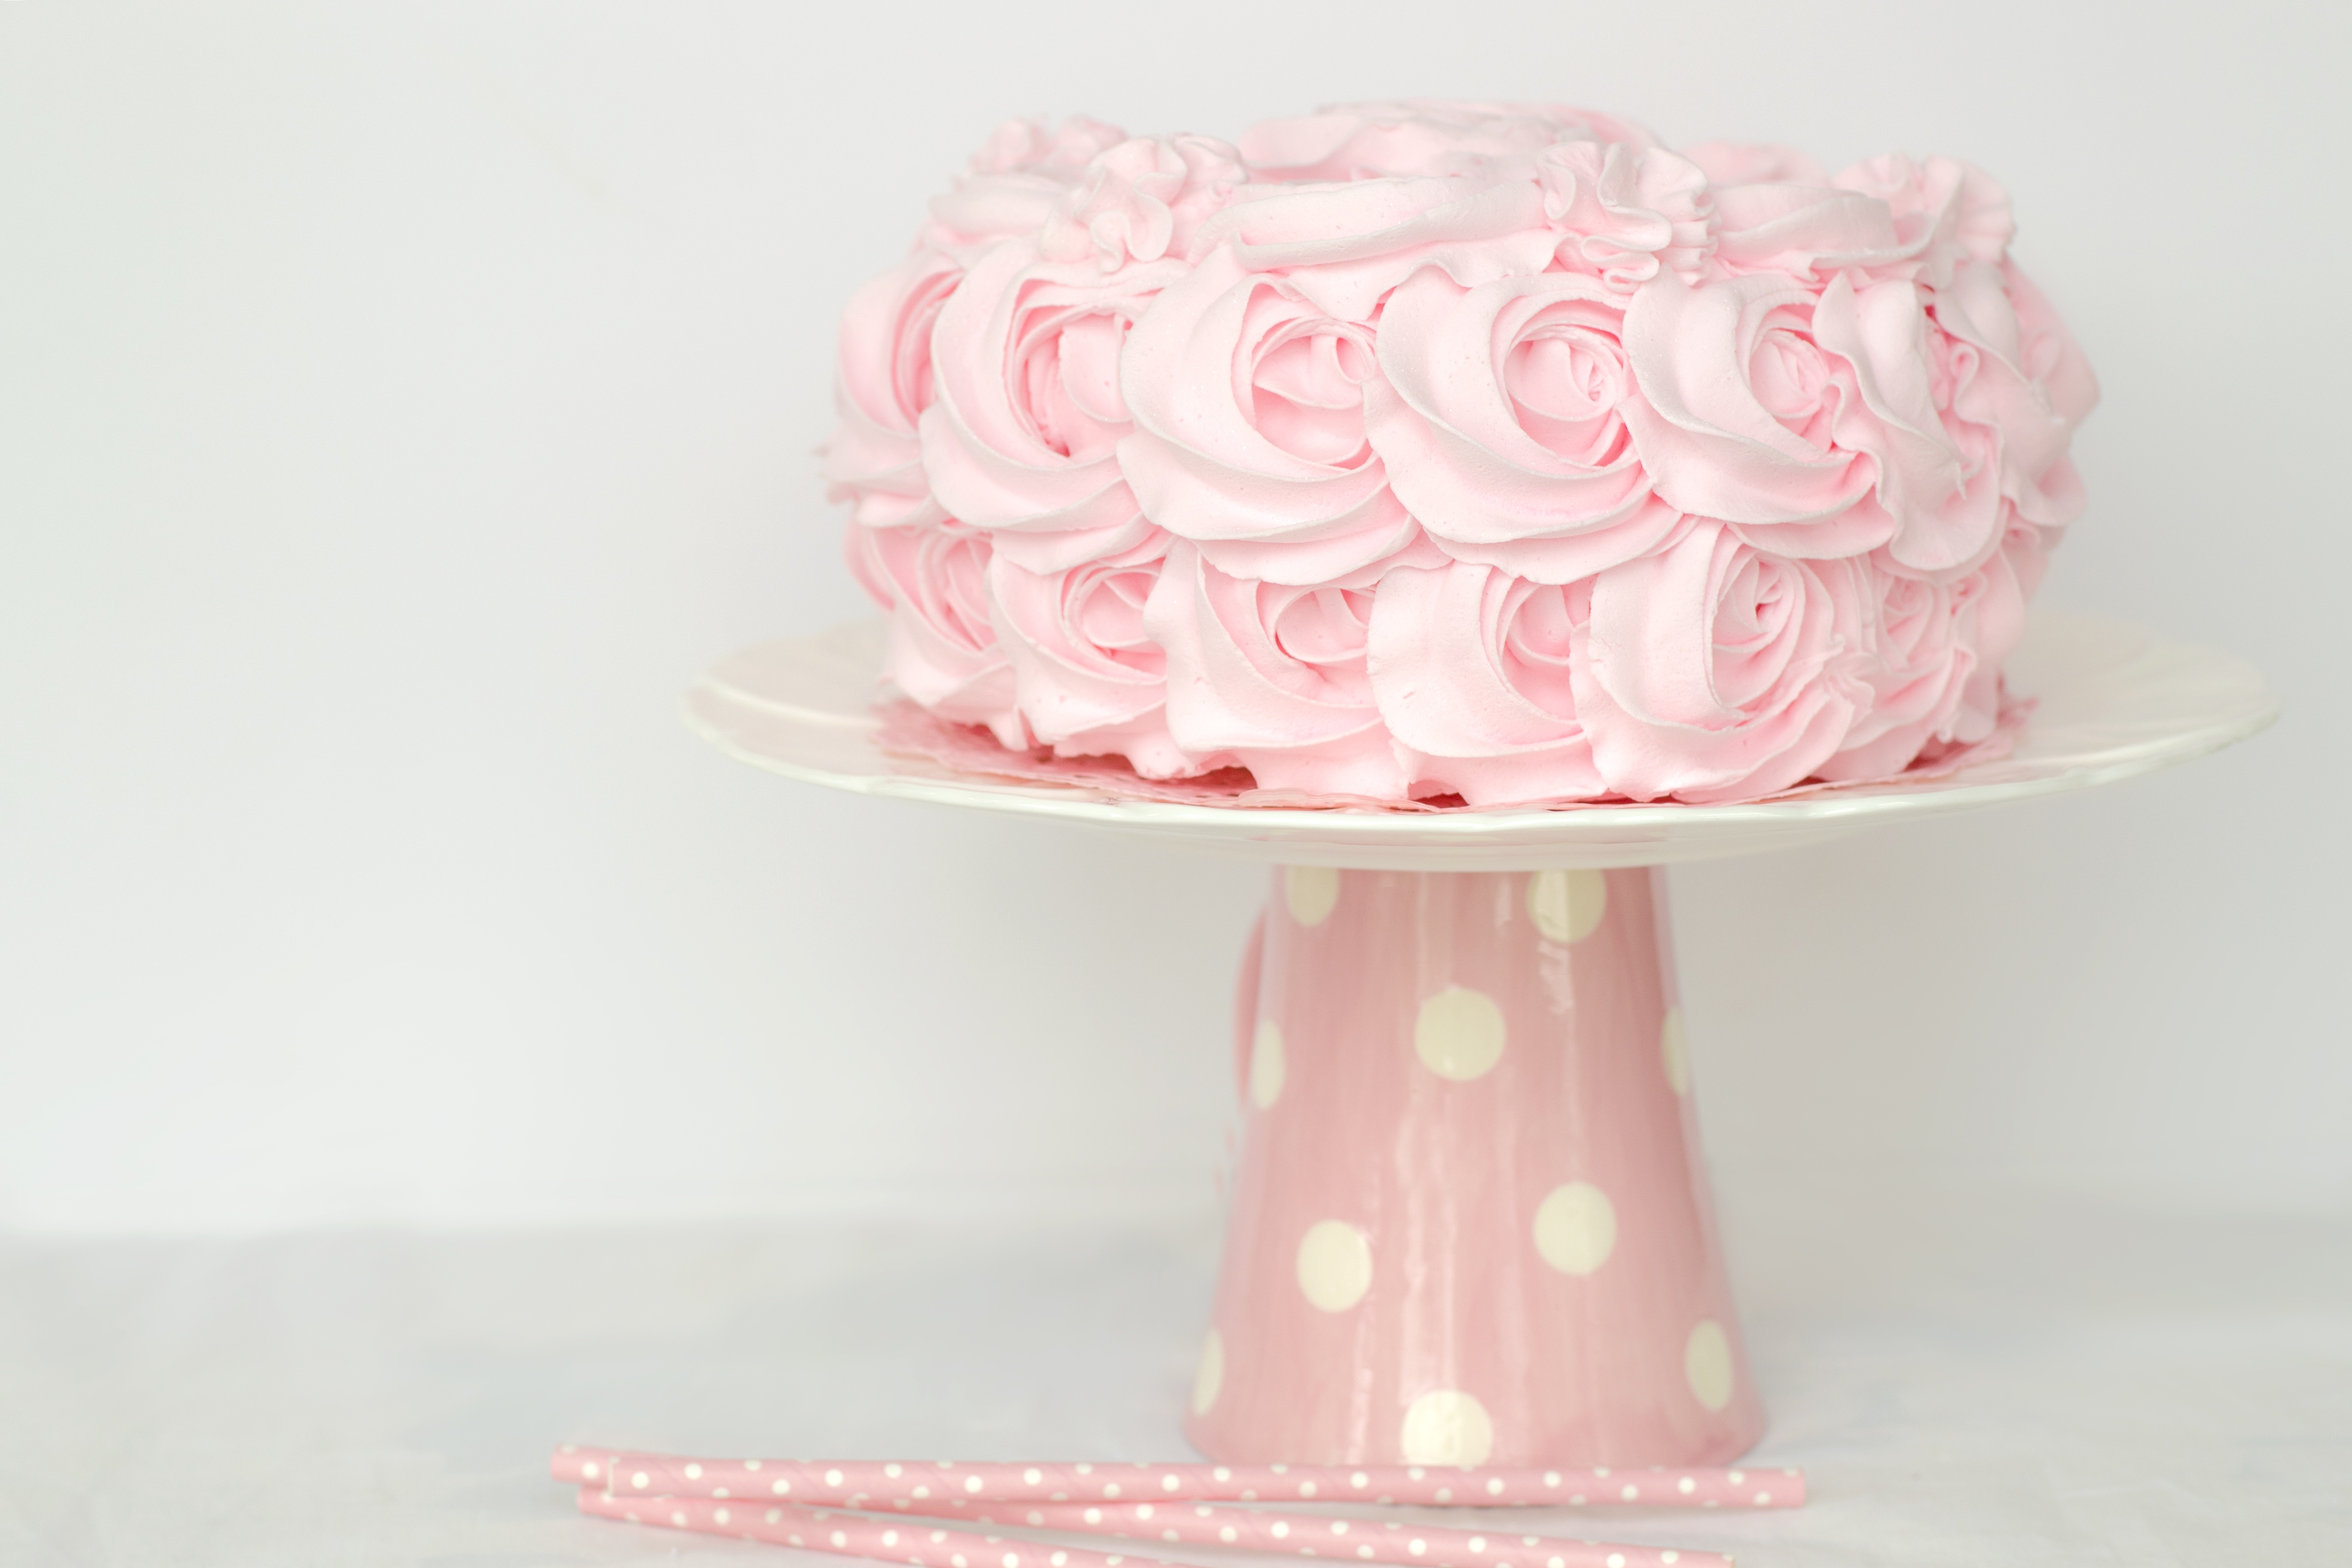 Use a colorful cake plate to coordinate with your cake.